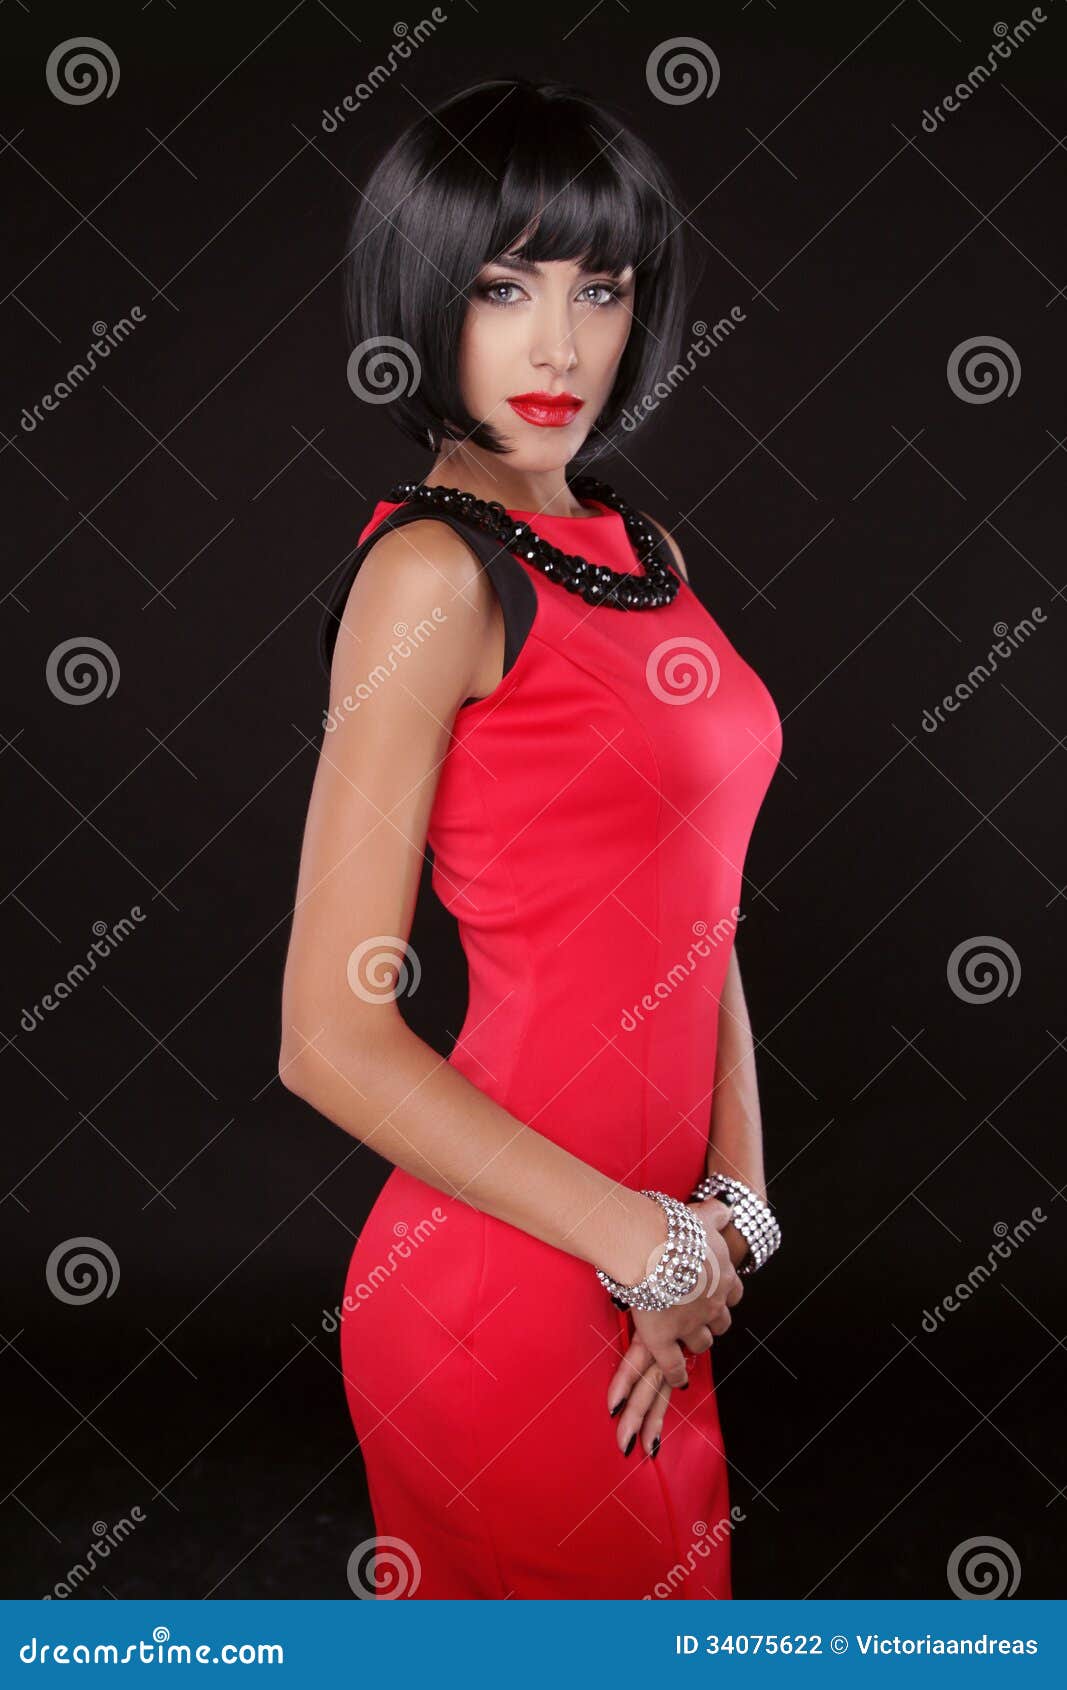 fashion elegant woman in red dress. brunette lady with black short hair. vogue style. model posing  on black background